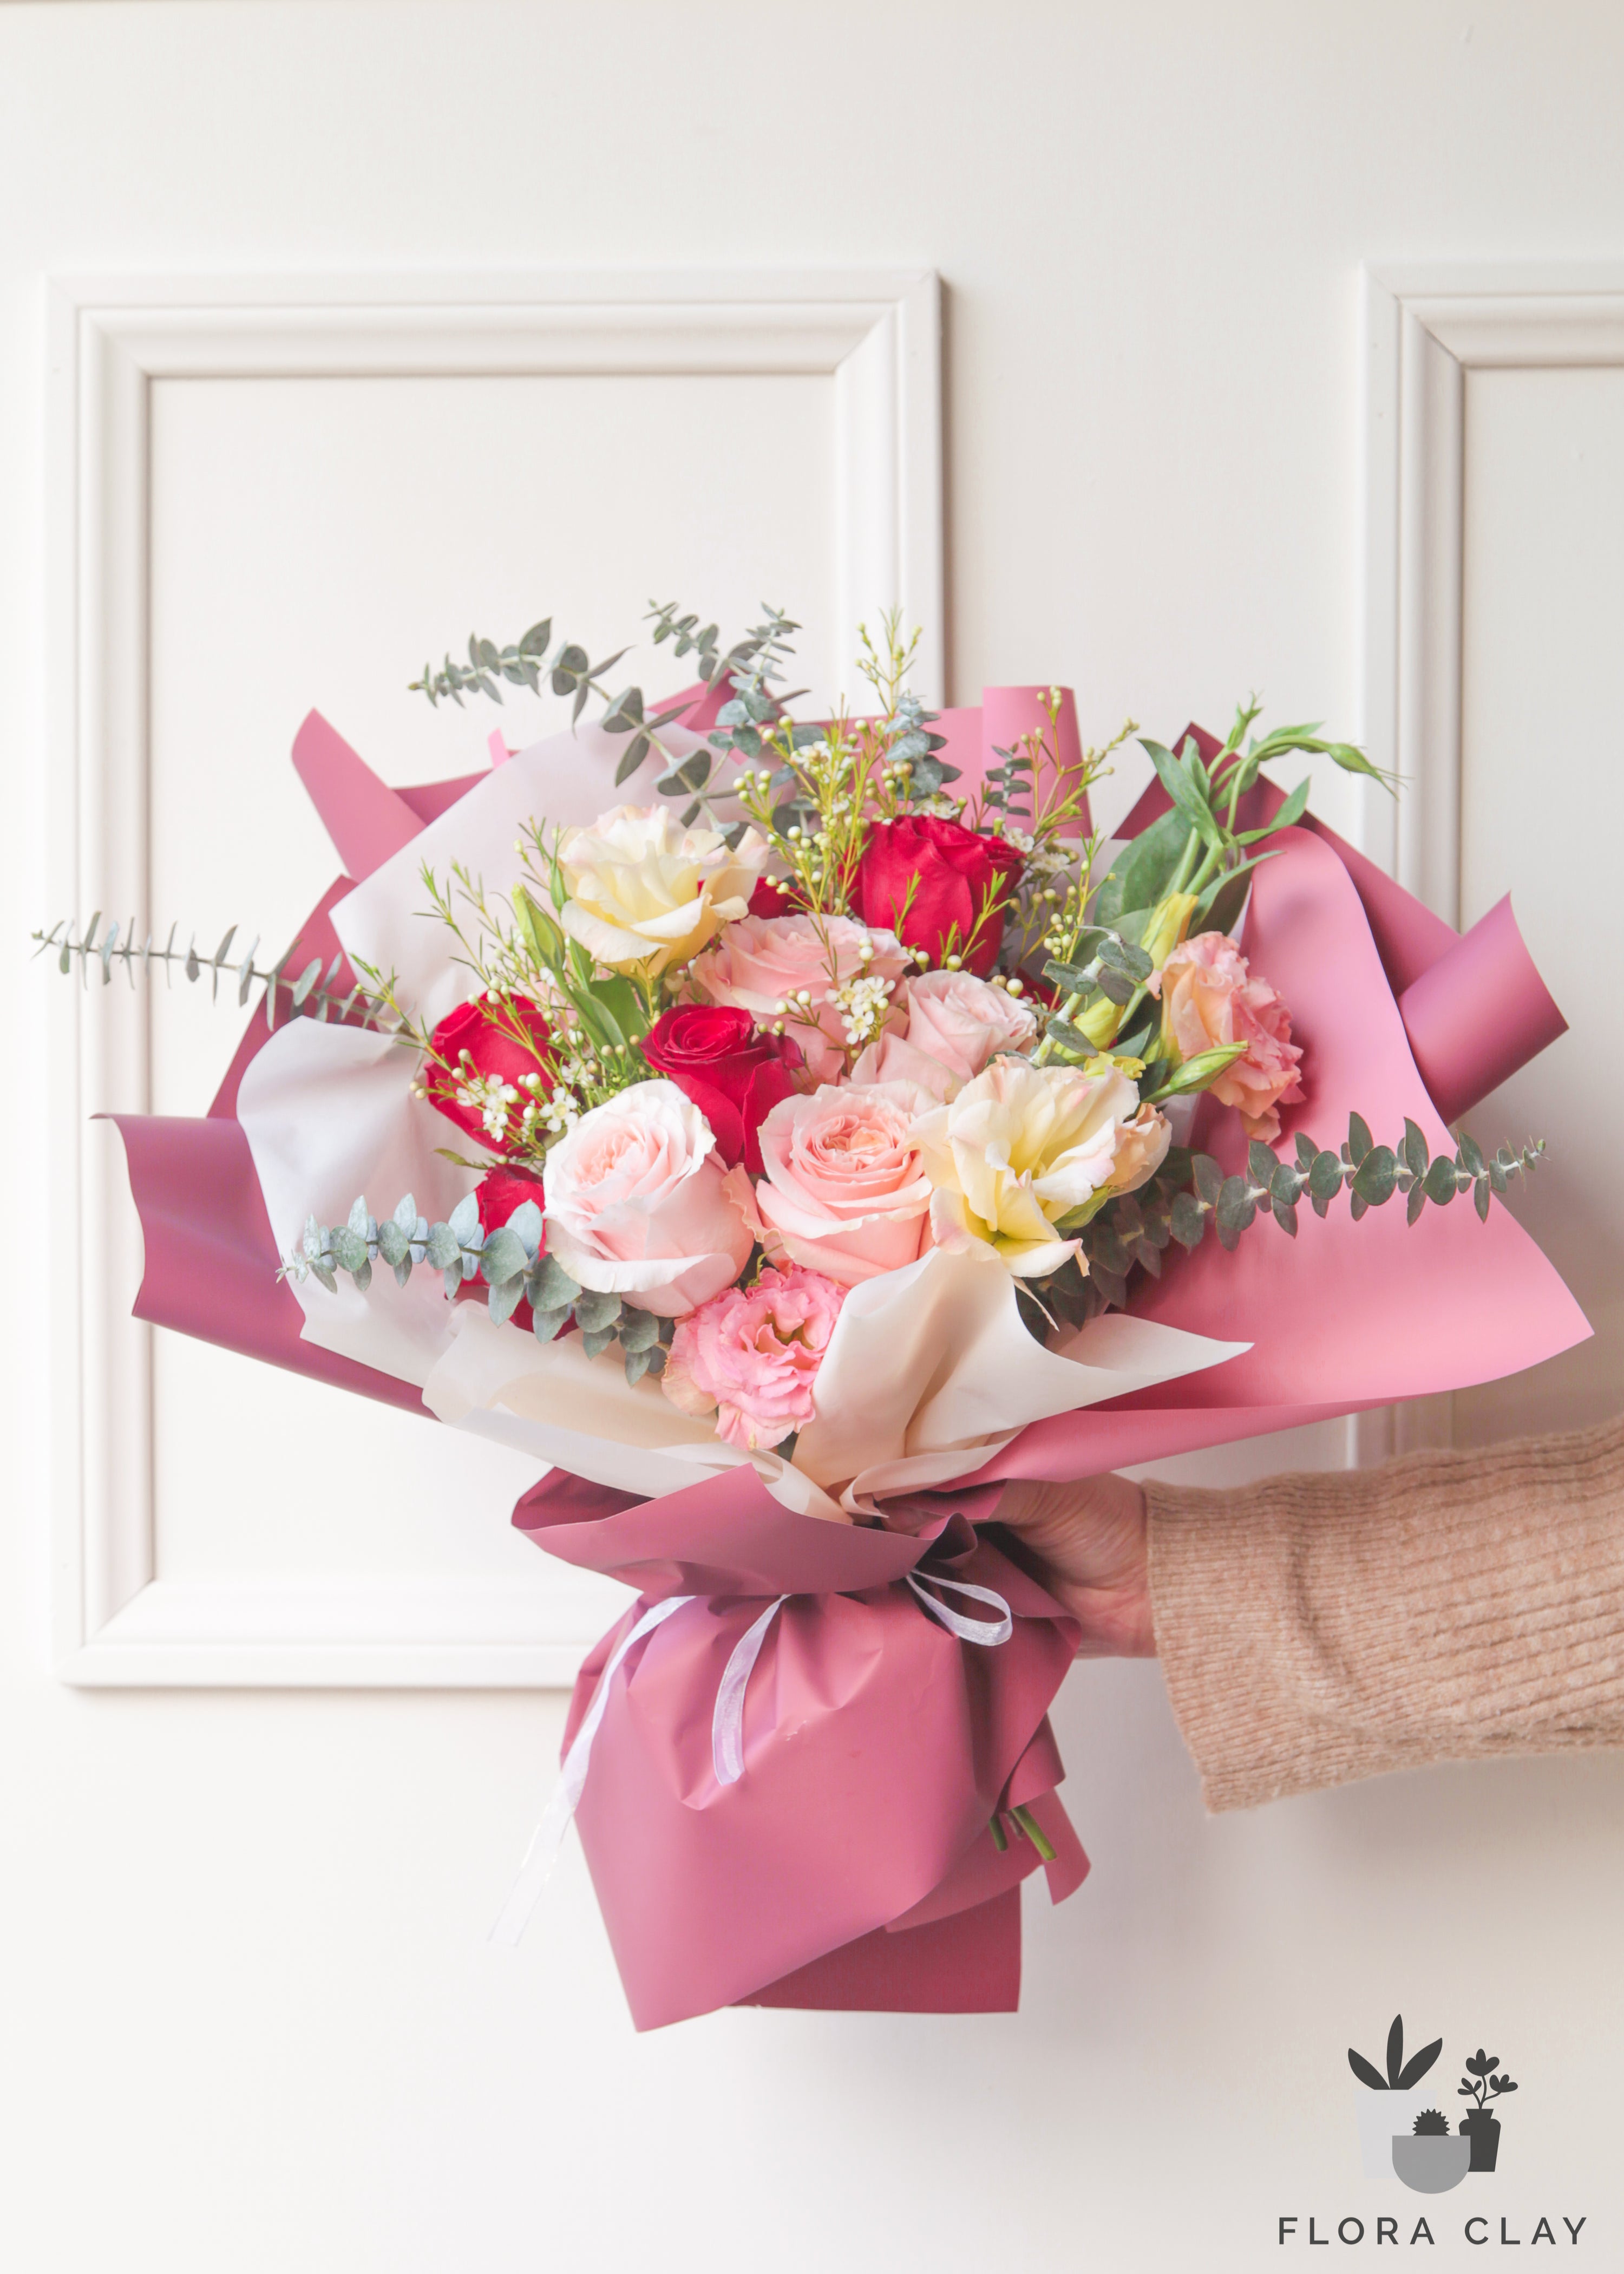 Add Flower Delivery and Pickup to Your Flower Shop